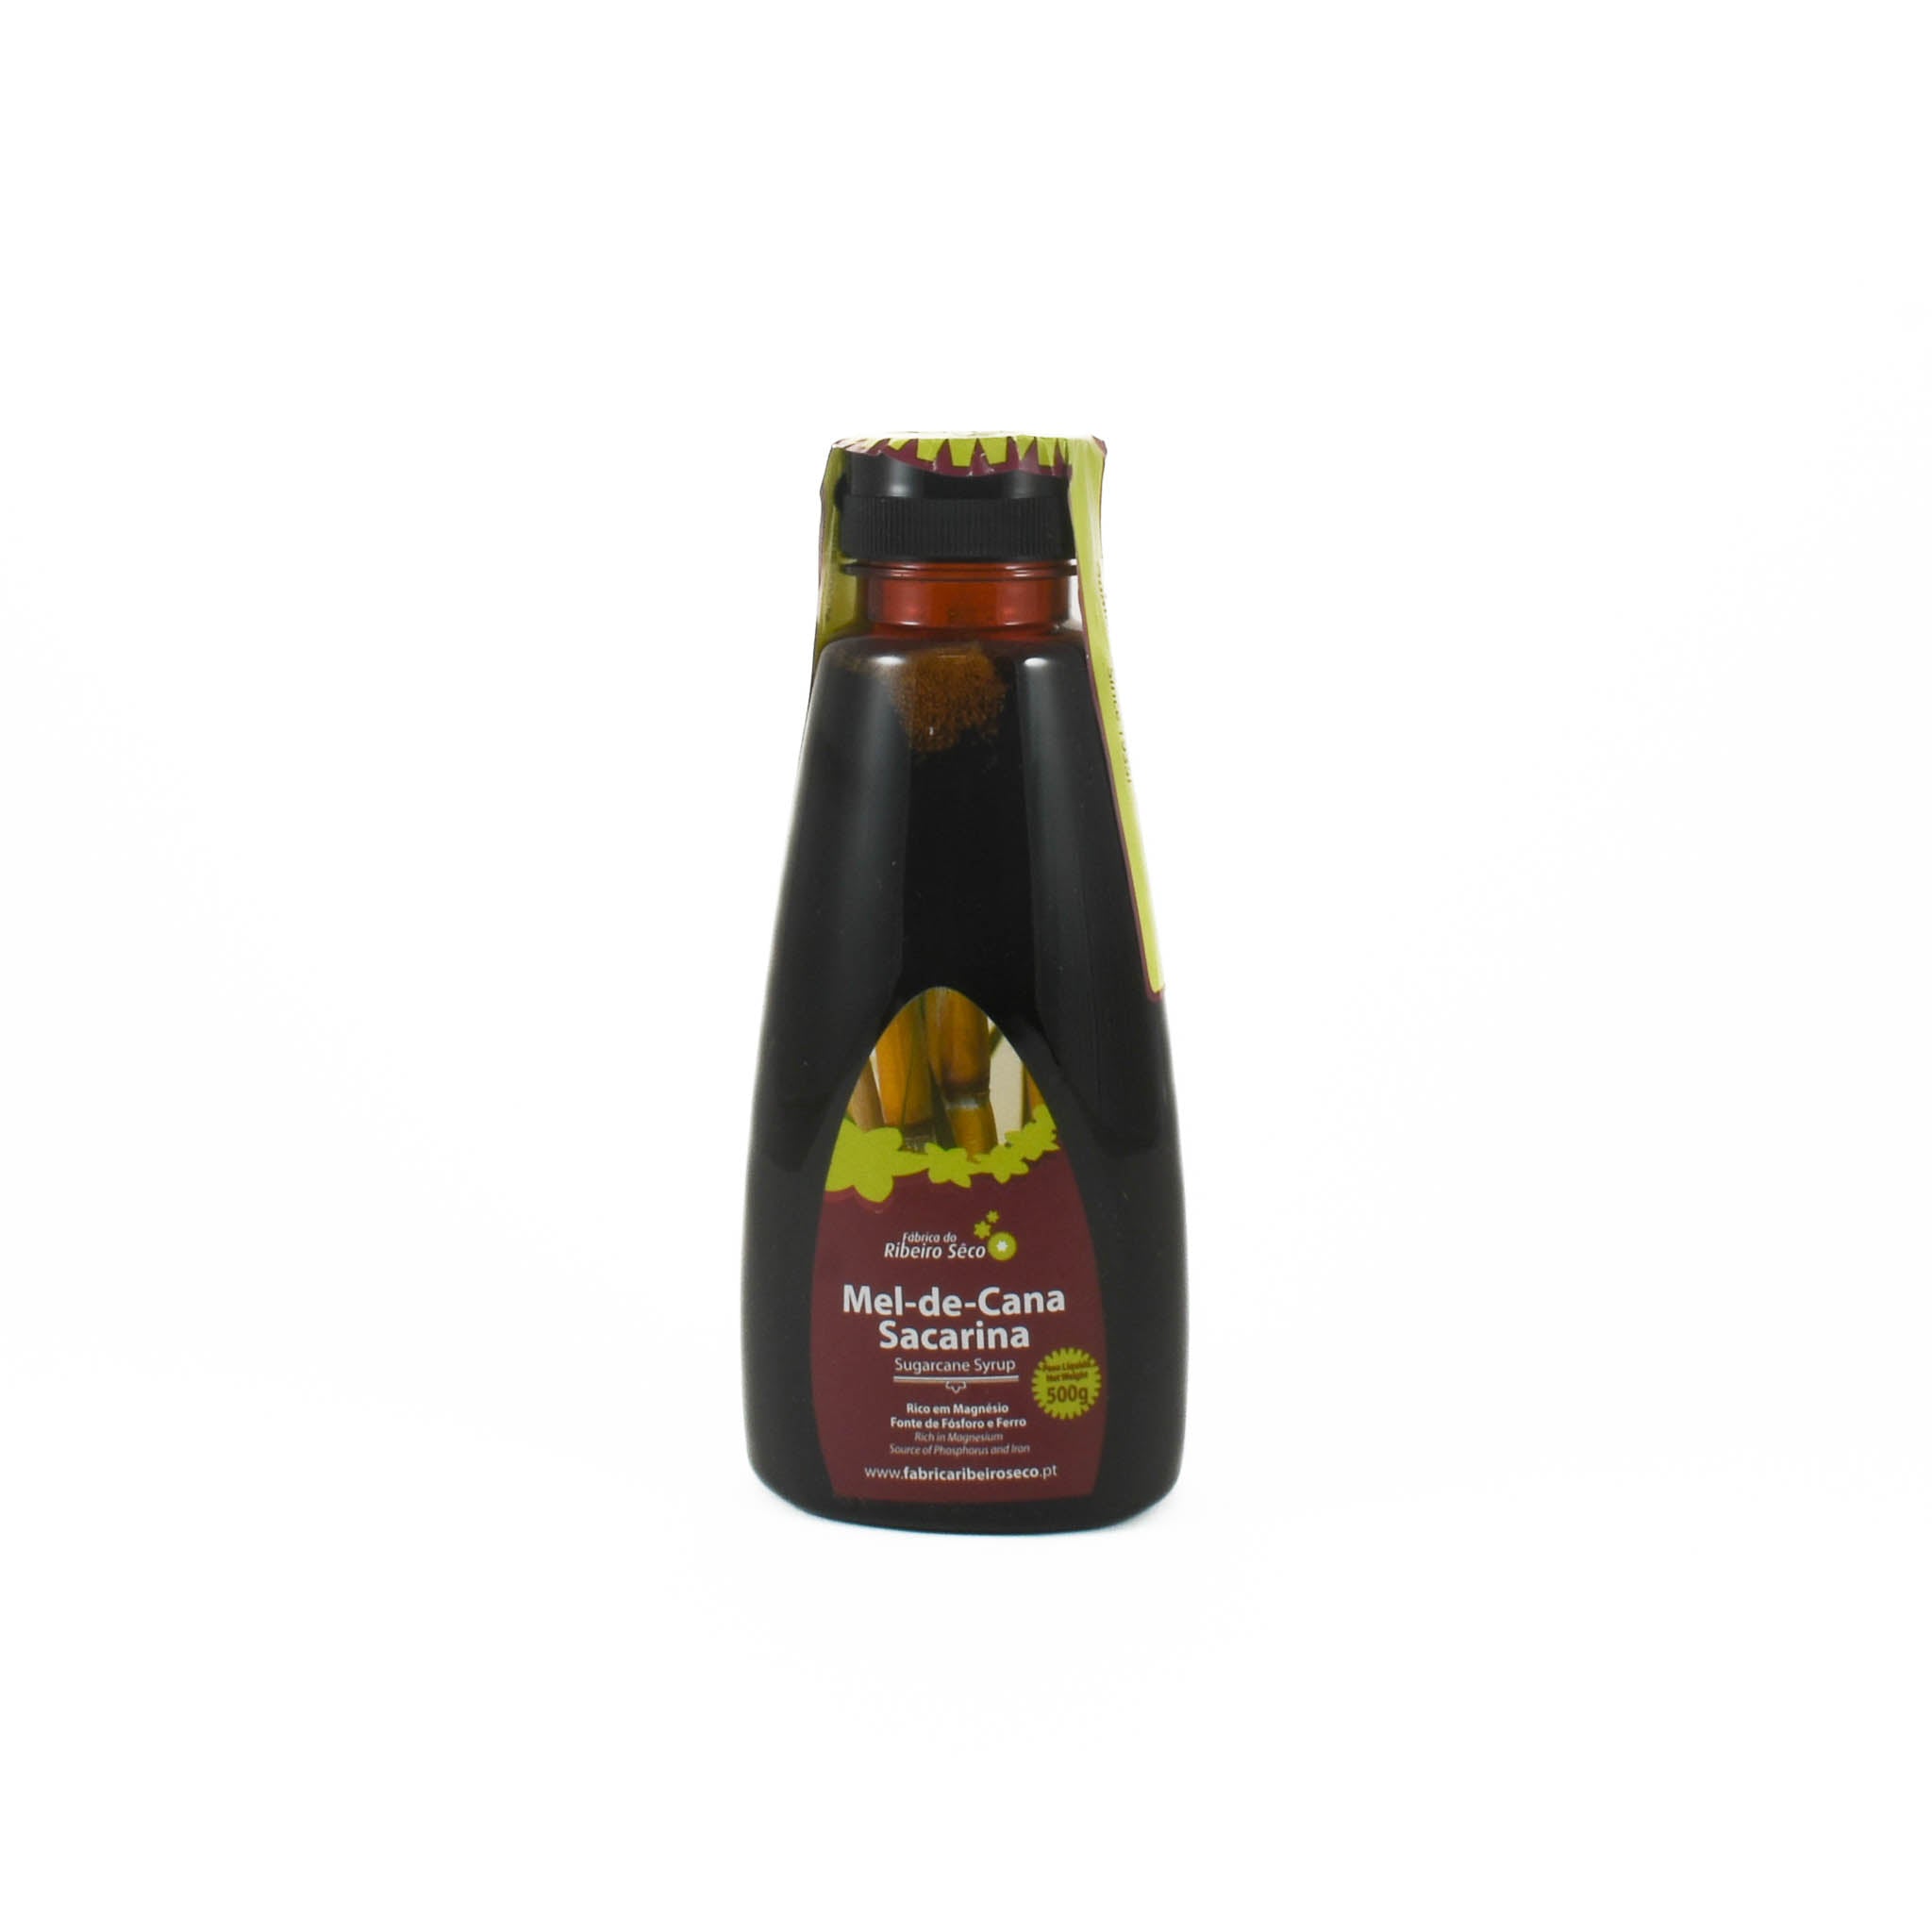 Ribiero Seco Madeira Sugarcane Syrup, Squeezy Bottle 500g